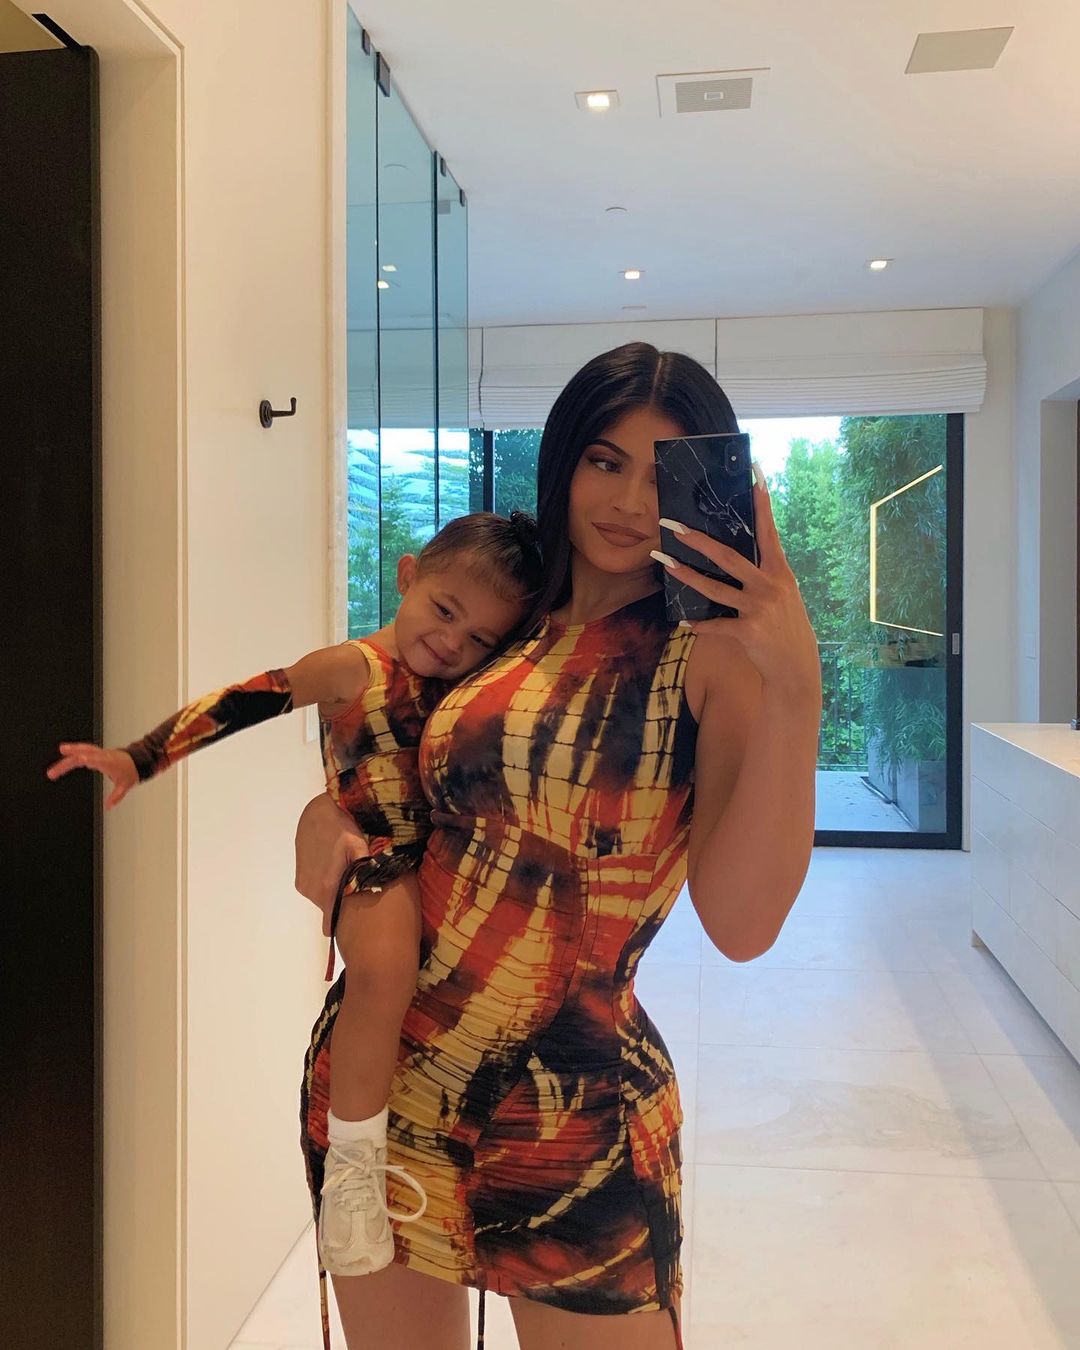 Kylie Jenner and Stormi Webster Do the Toddler Cuddle Challenge